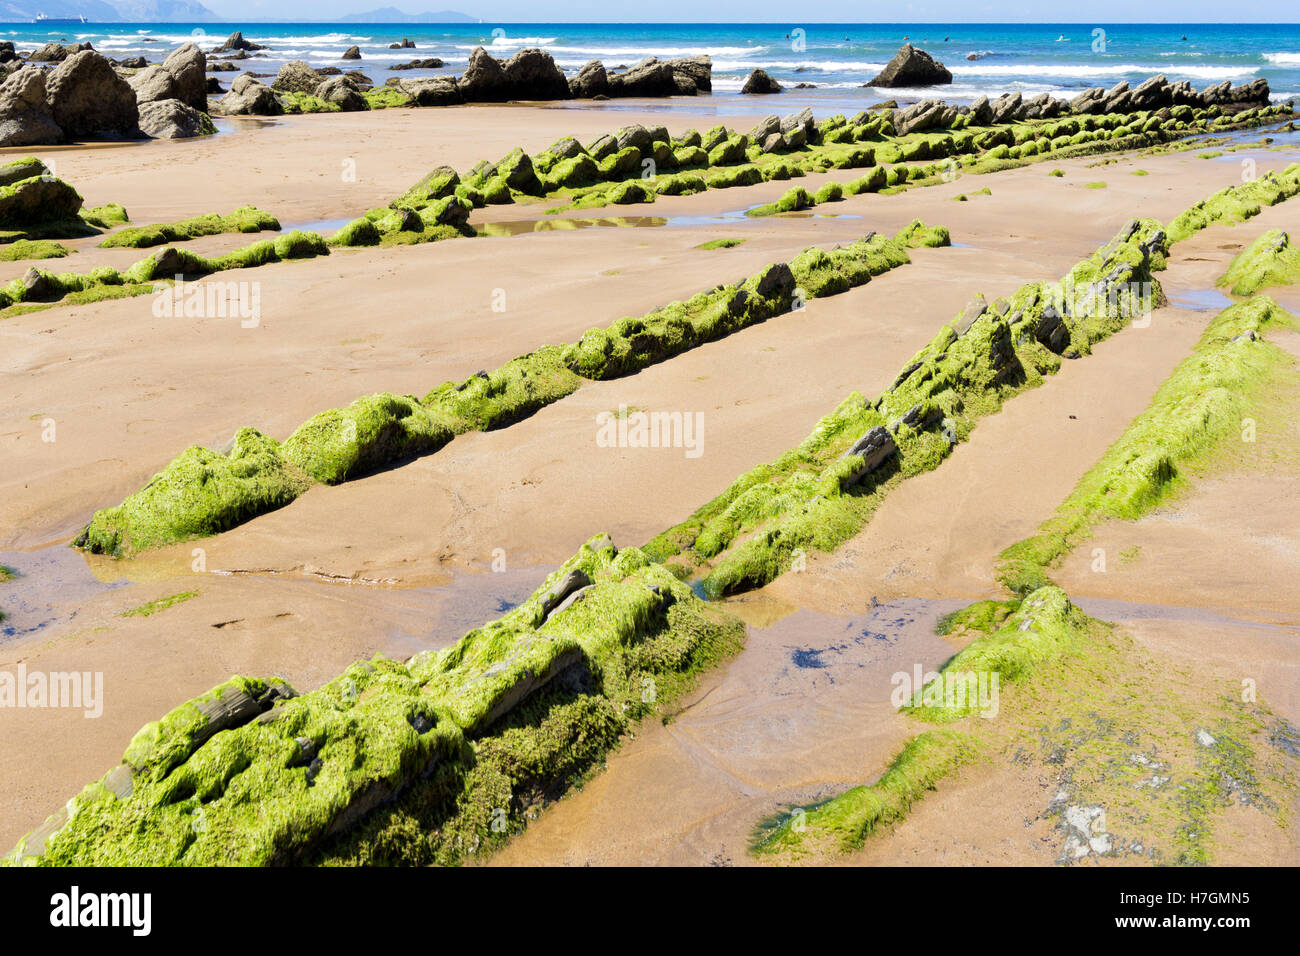 Green seaweed on rocks at the beach, with the sea in the foreground Stock Photo